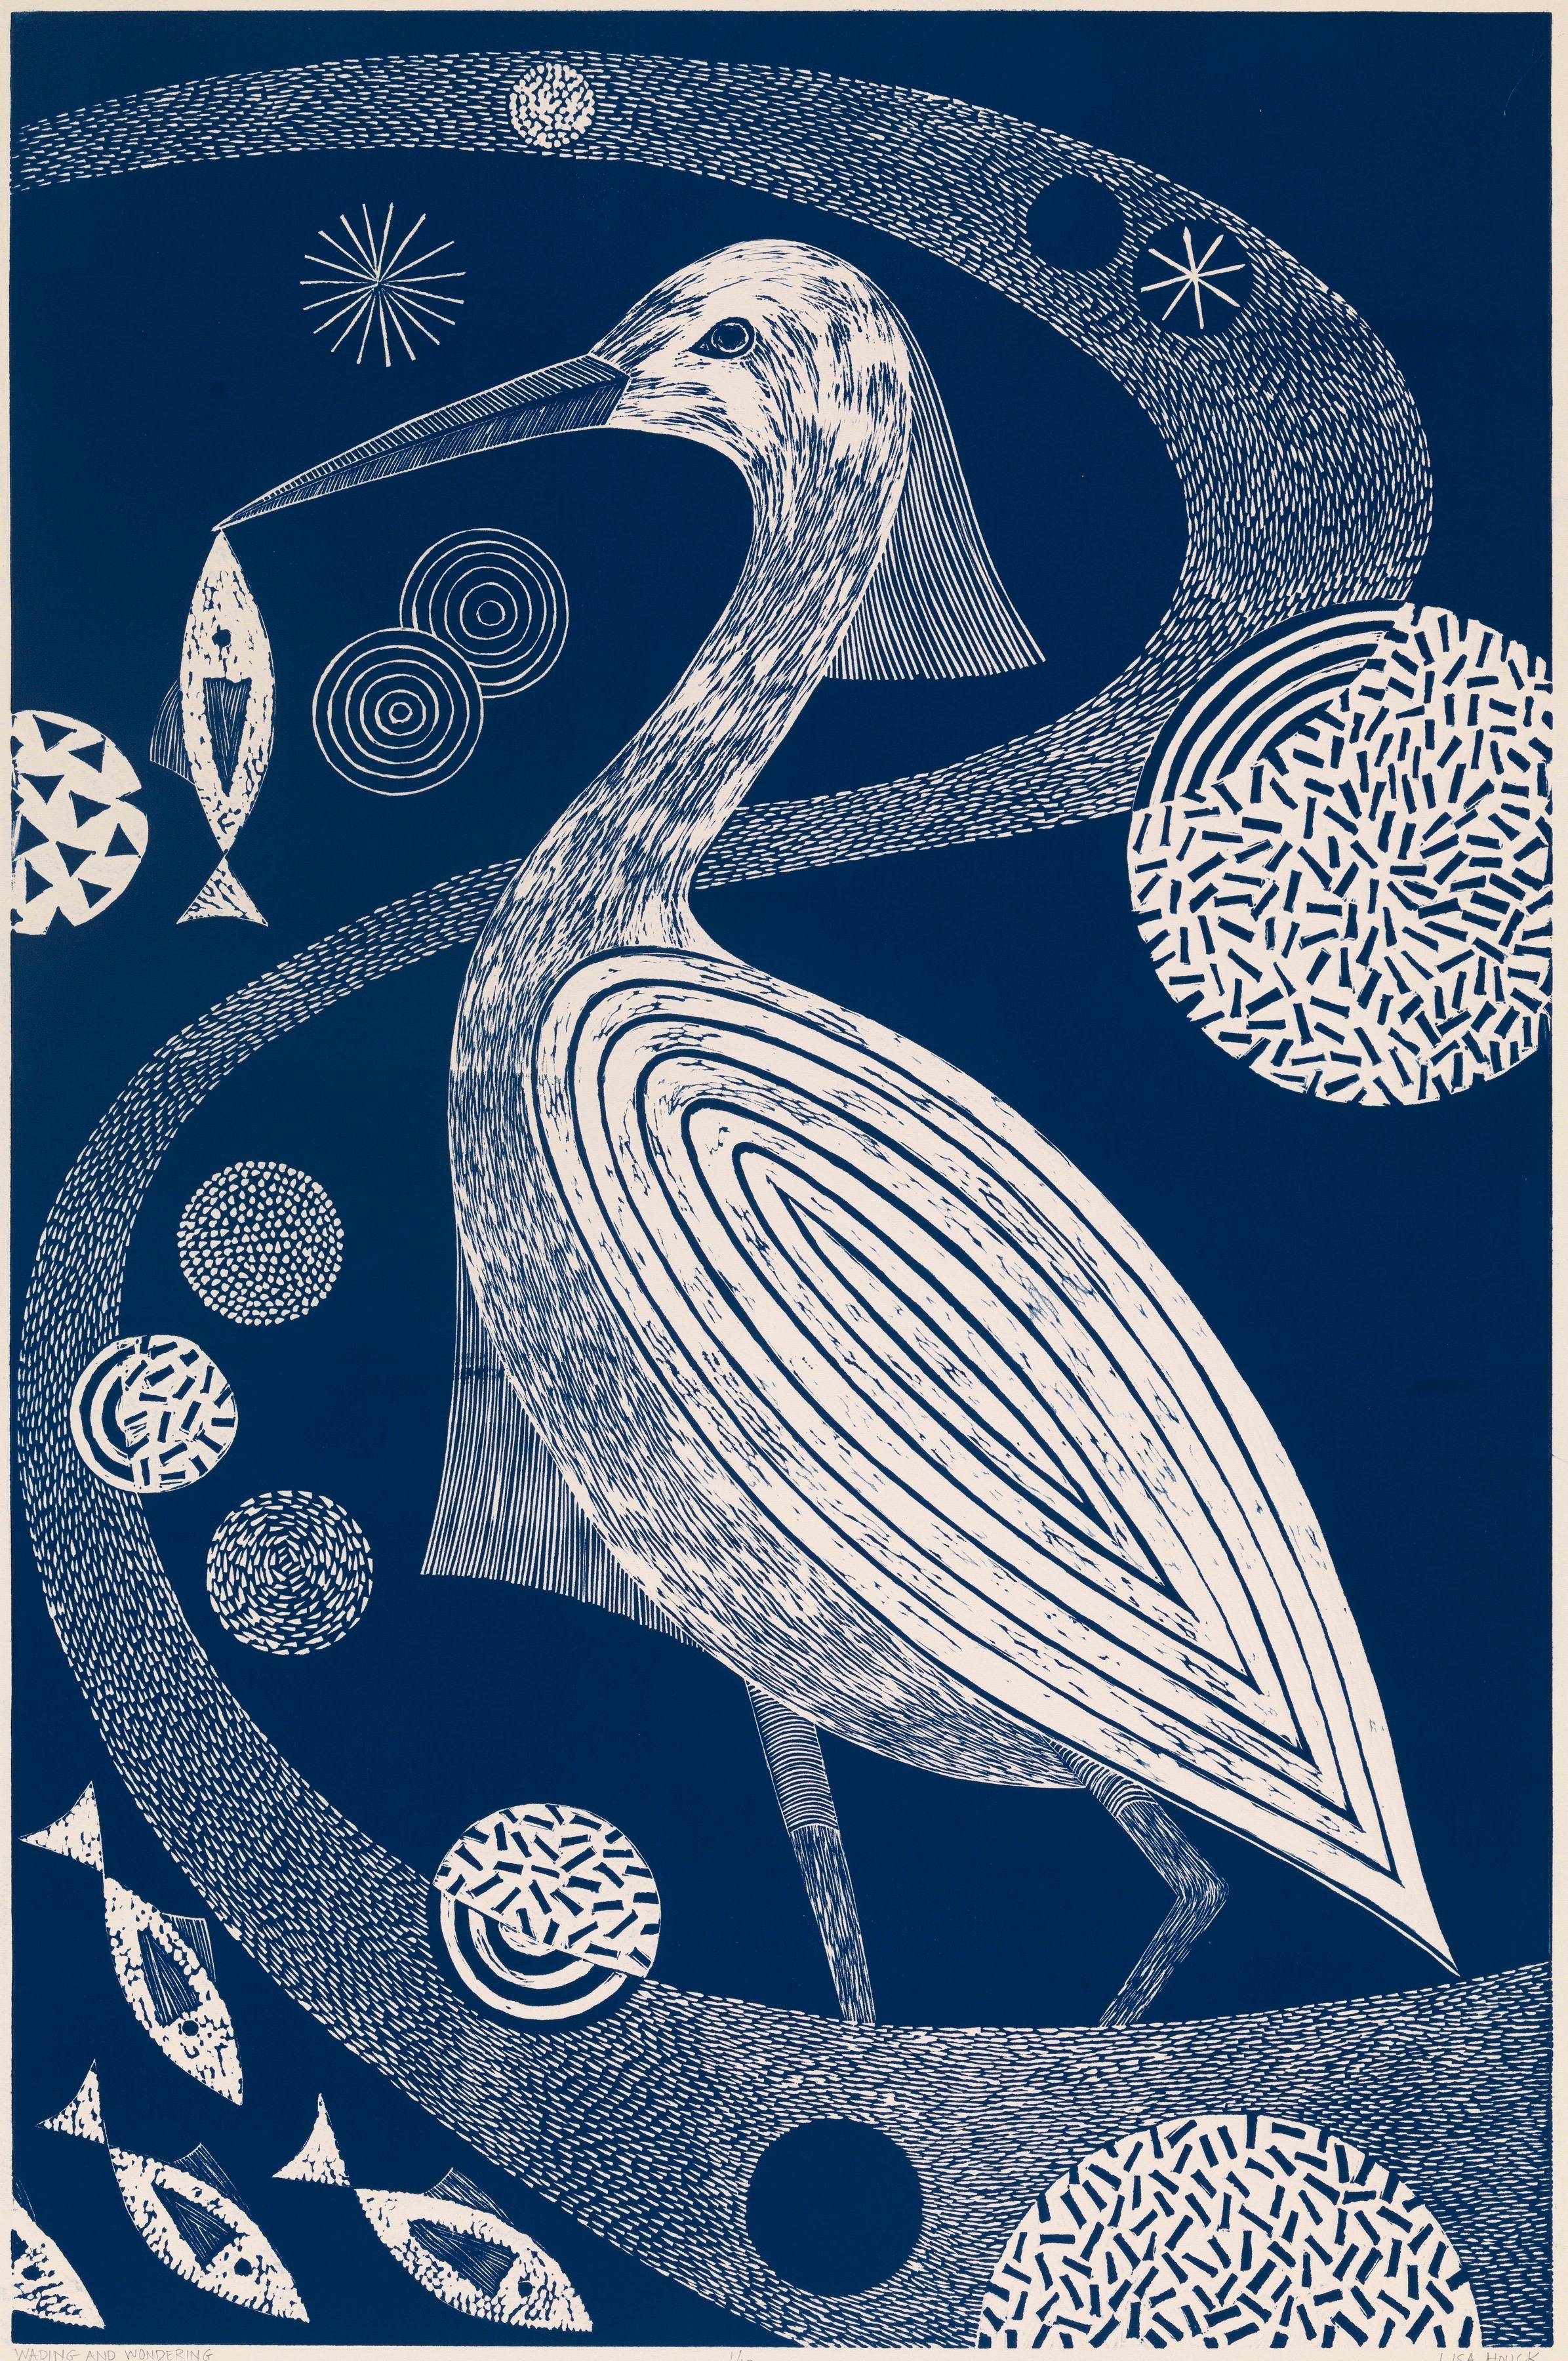 'Chittering and Chattering,'  Linoleum Block Print, Edition 10,  35 1/4 x 23 1/4 Inches, is one of a series of 8 related prints in this size in varying shades of blue.   Sold individually or as sets of 2, 3, 4, 5, 6, 7 or 8. 

There is also a